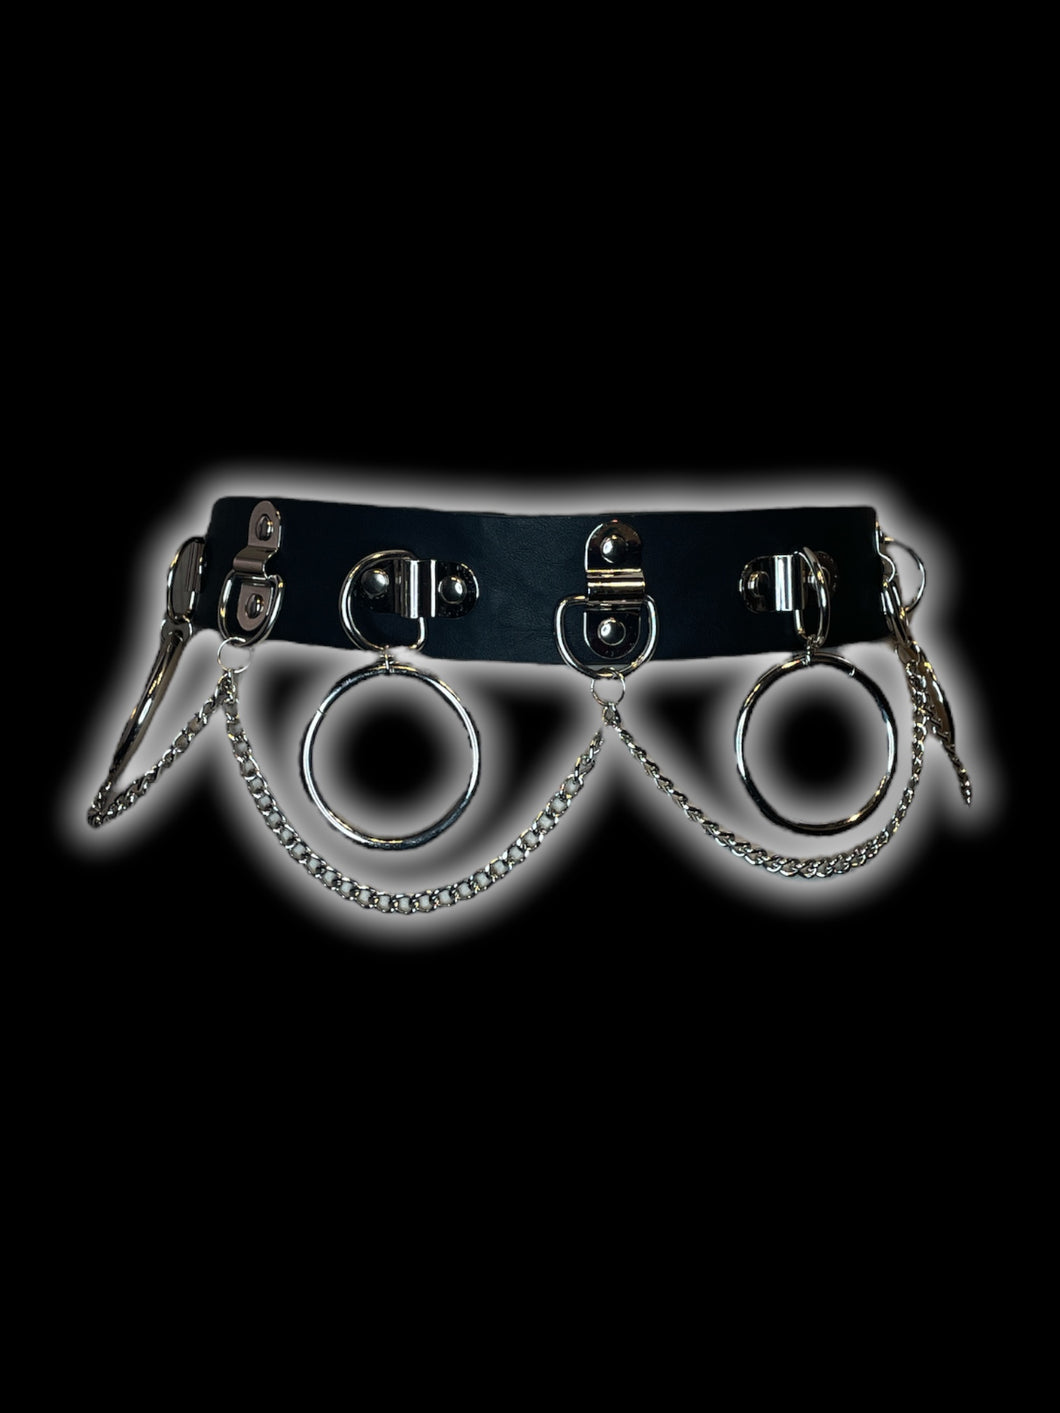 S Black pleather waist belt w/ silver-like chains, d-rings, & o-rings